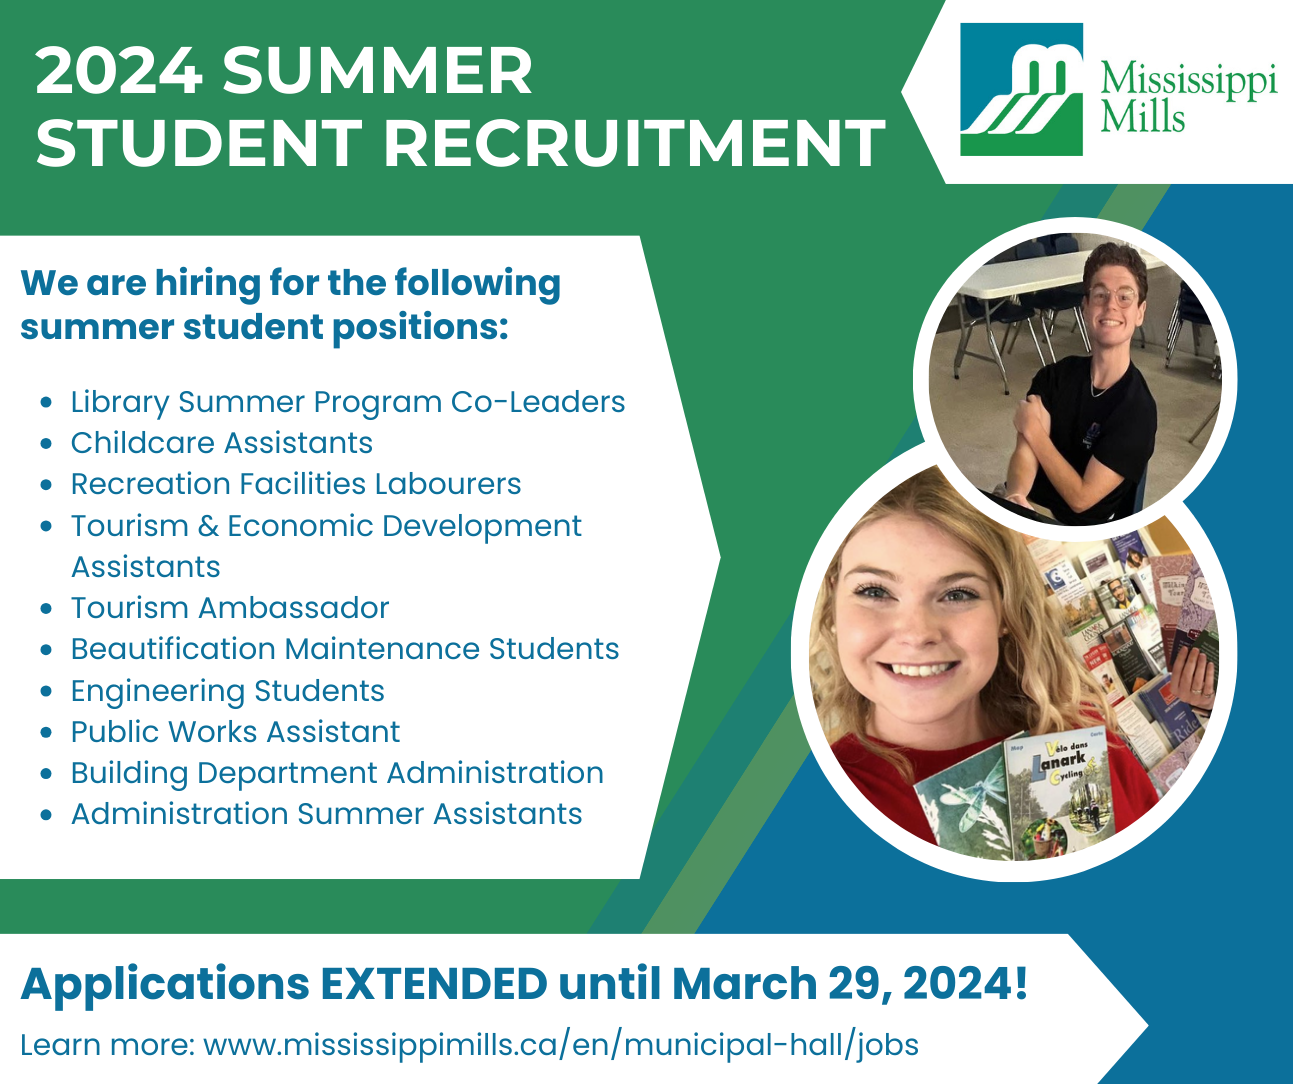 Green, blue and white graphic with photos of summer students advertising 2024 summer student recruitment in Mississippi Mills 